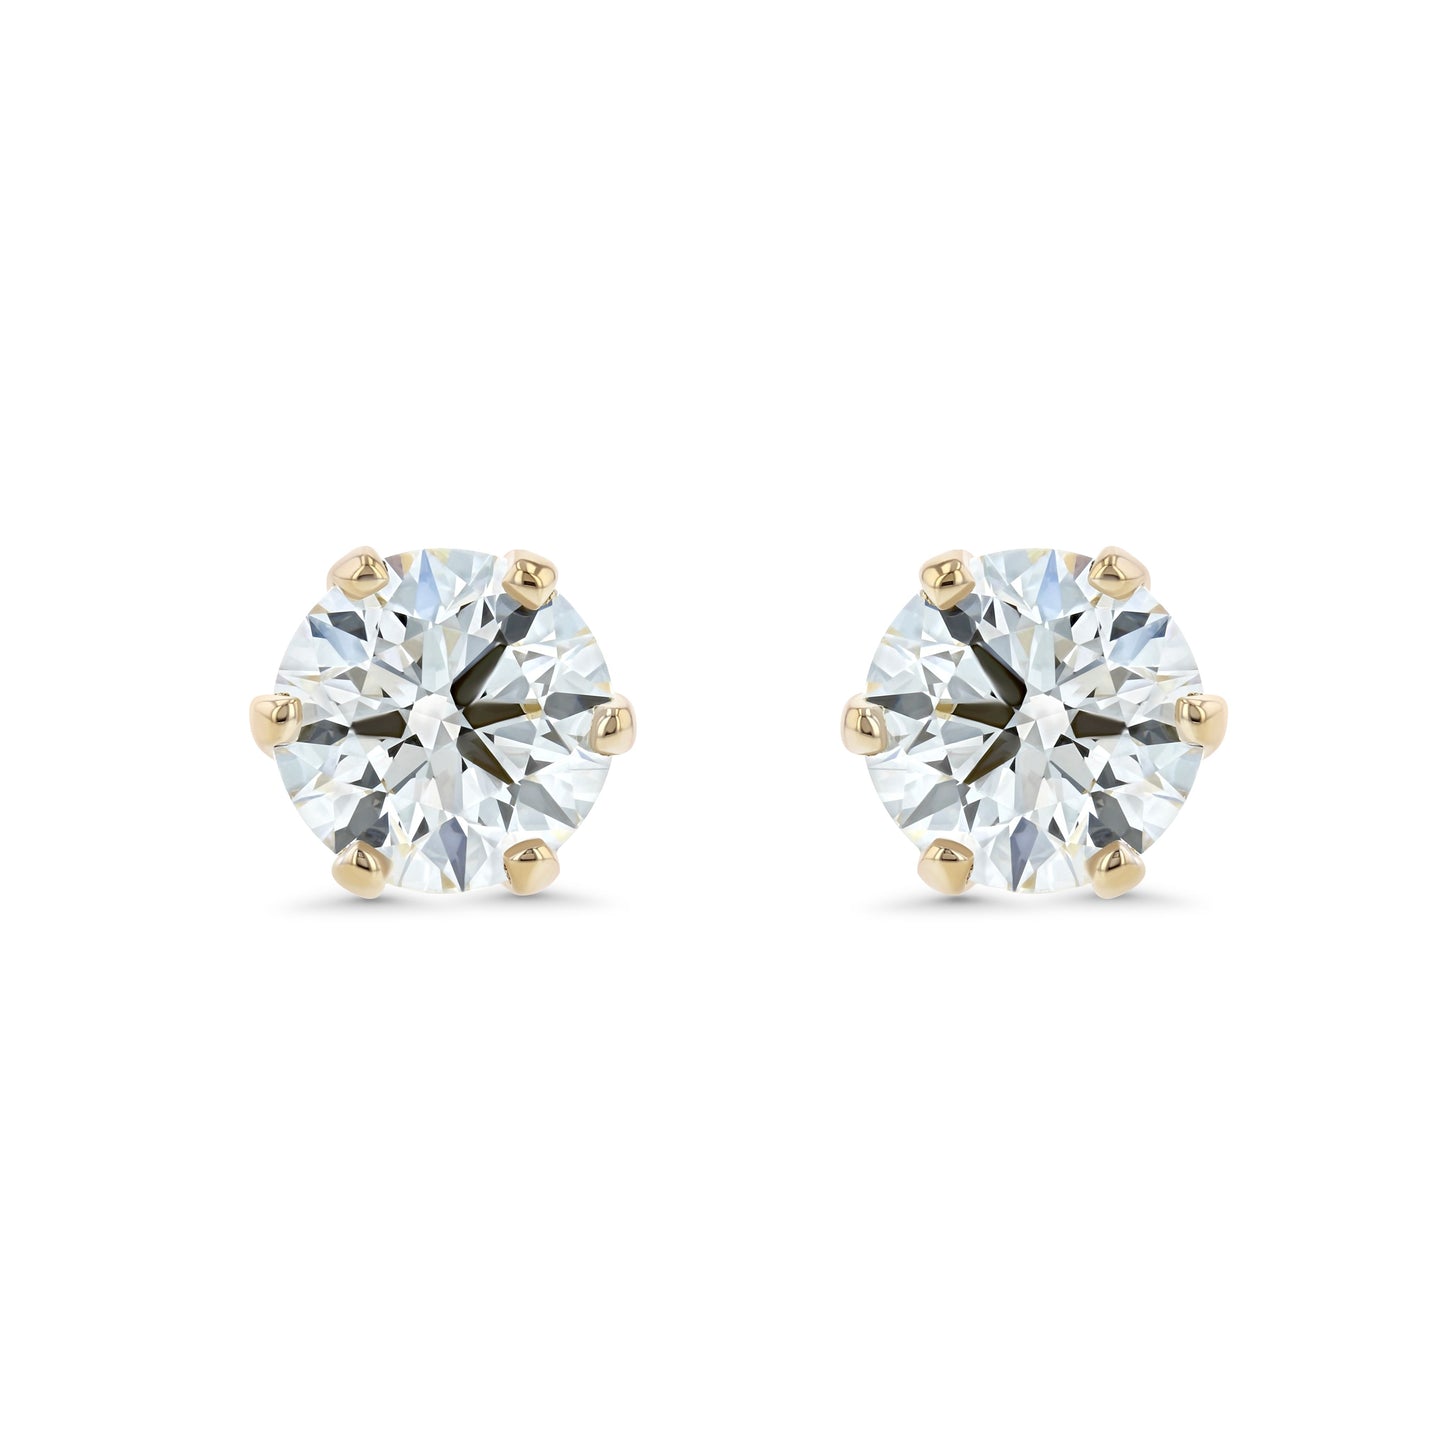 14k Yellow Gold 6-prong Round Diamond Stud Earrings 1/2ctw (4.1mm Ea), M-n Color, Si2-si3 Clarity